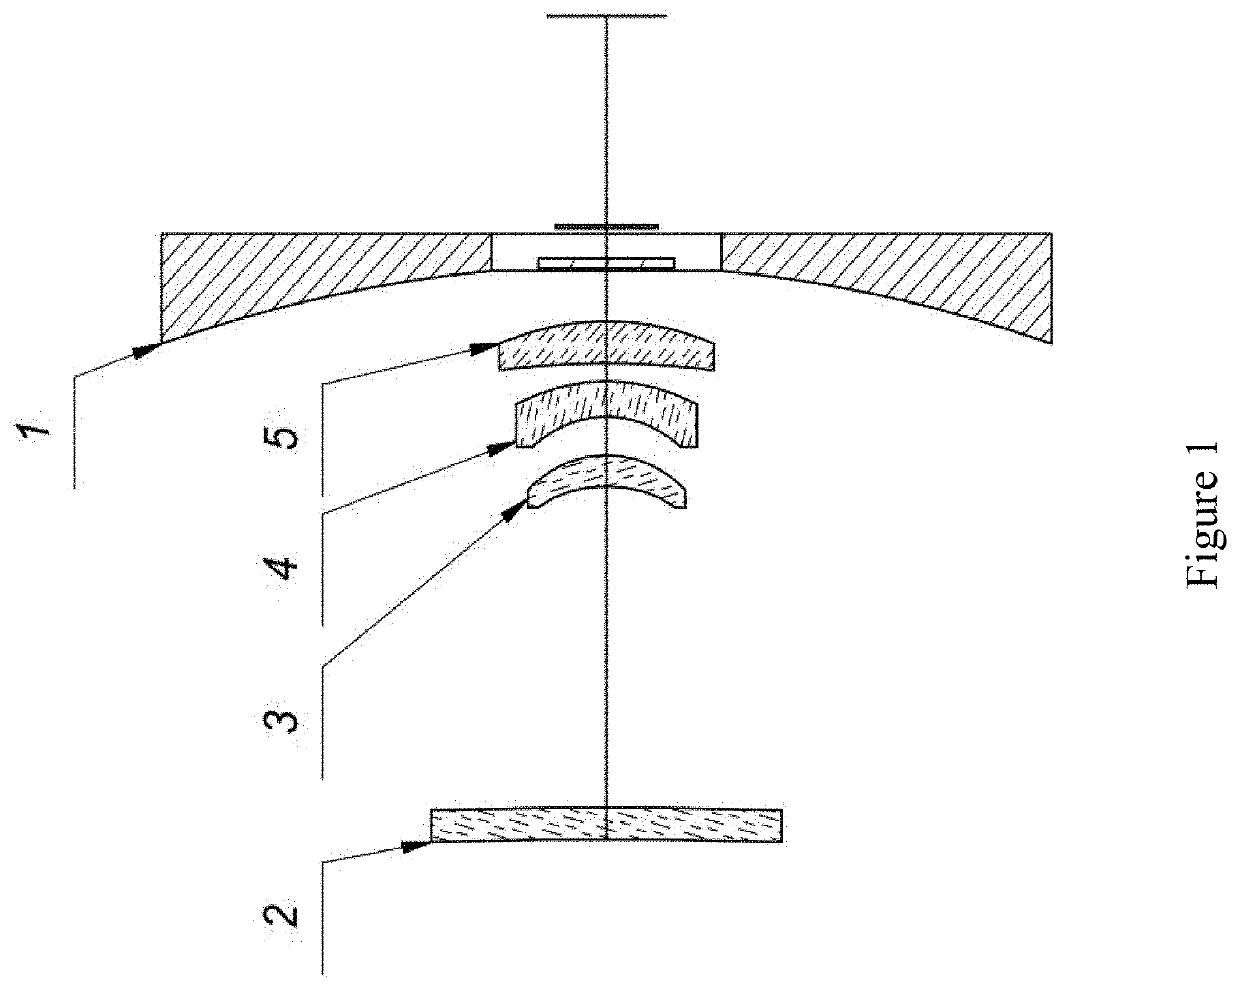 Long-wave infrared optical system for observing devices using the principle of the Cassegrain telescope